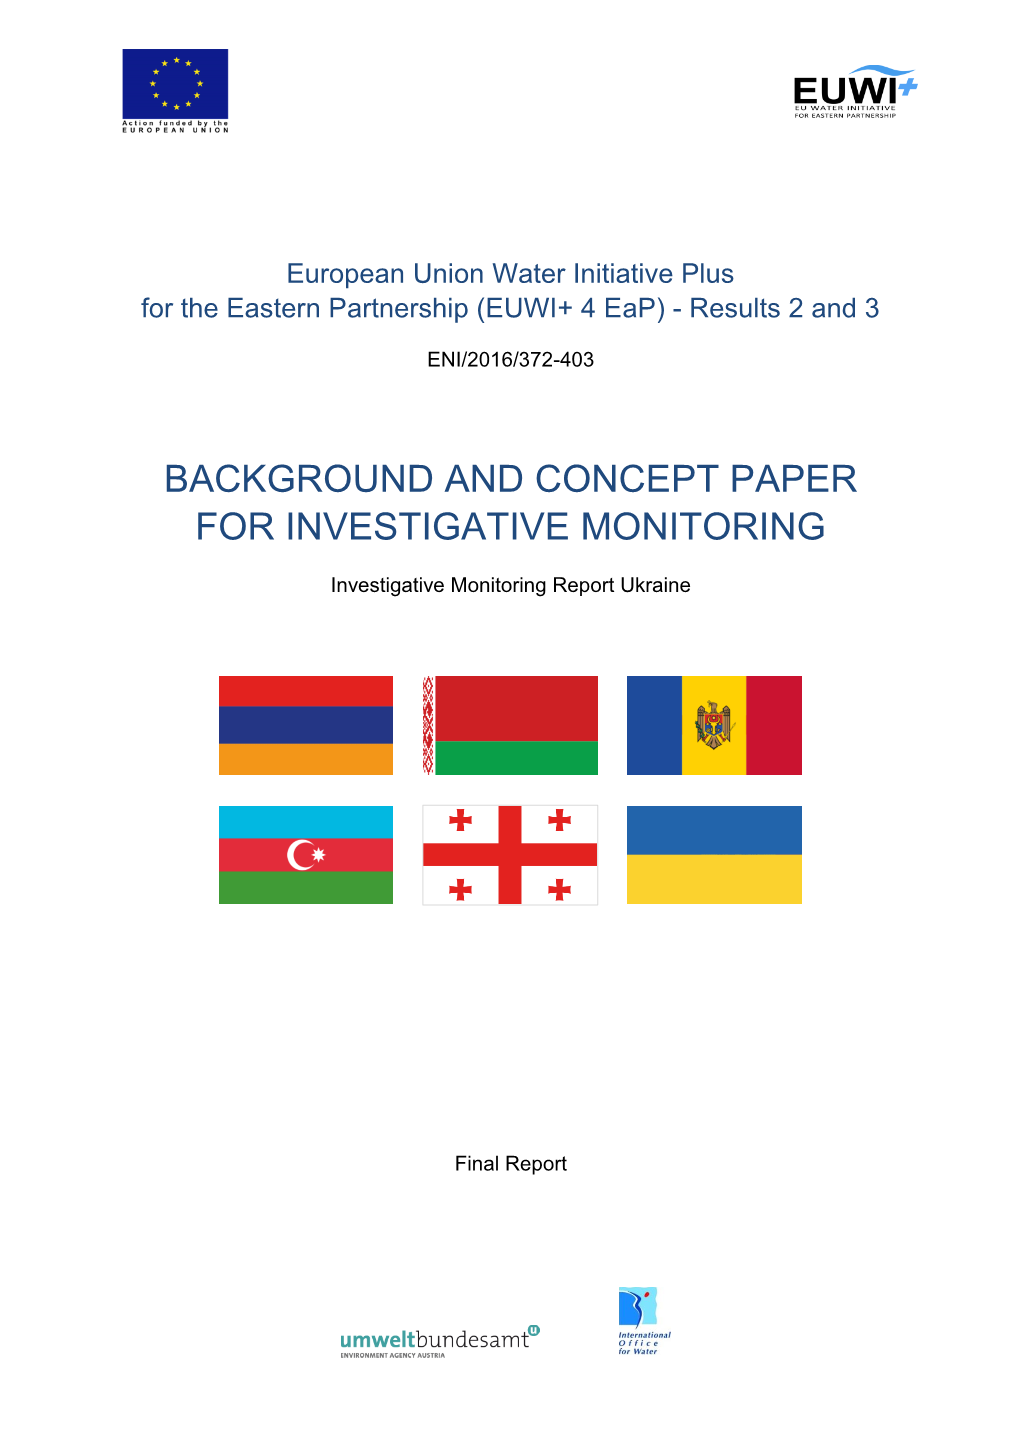 Background and Concept Paper for Investigative Monitoring